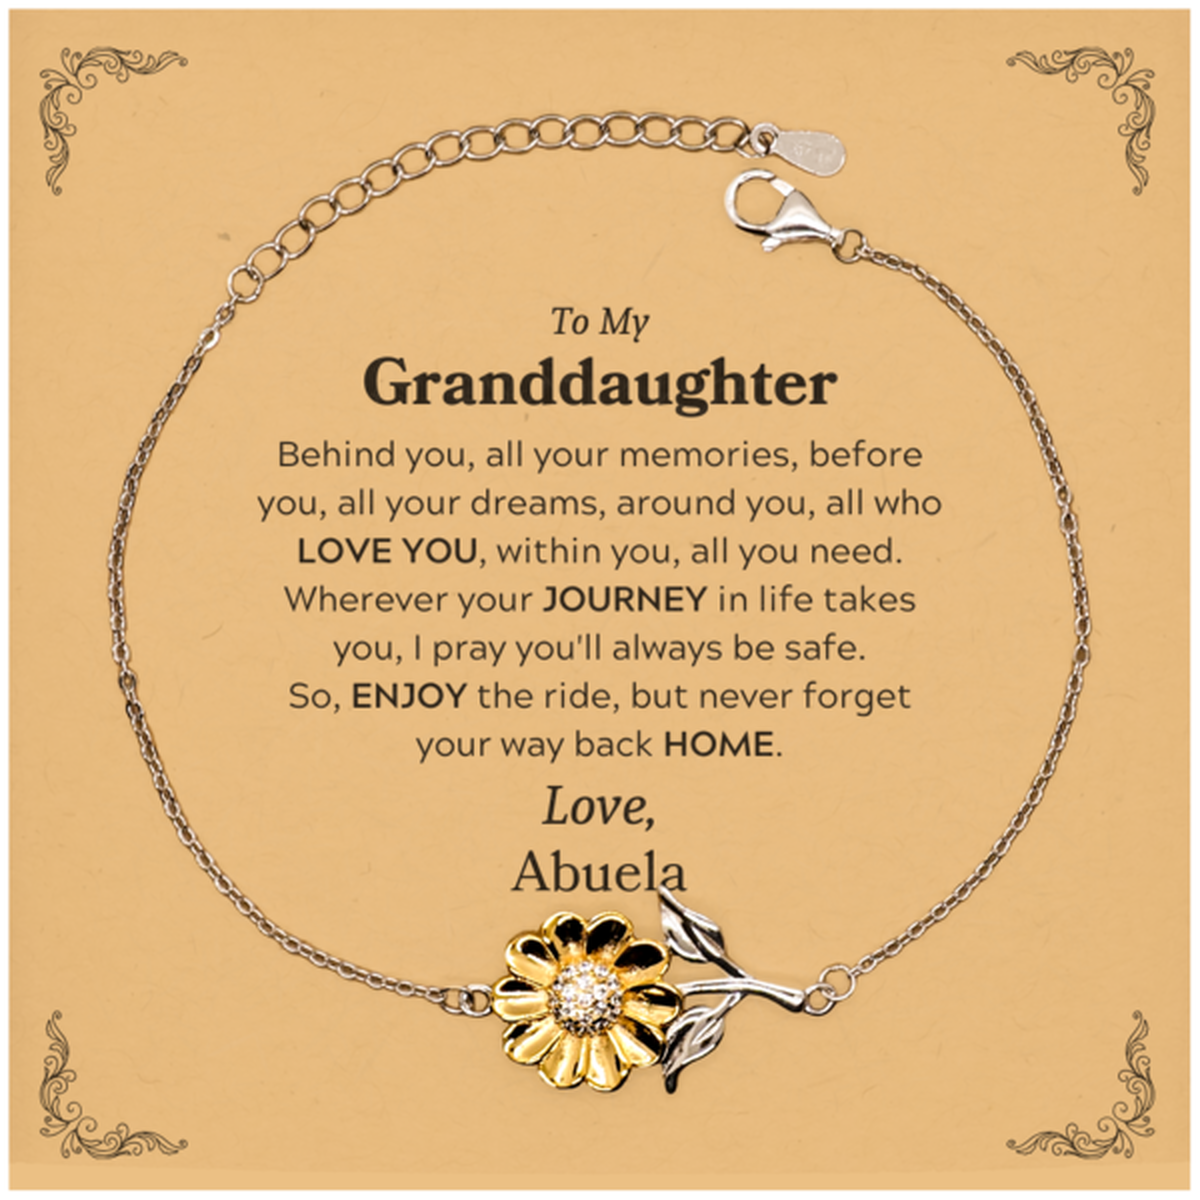 To My Granddaughter Graduation Gifts from Abuela, Granddaughter Sunflower Bracelet Christmas Birthday Gifts for Granddaughter Behind you, all your memories, before you, all your dreams. Love, Abuela